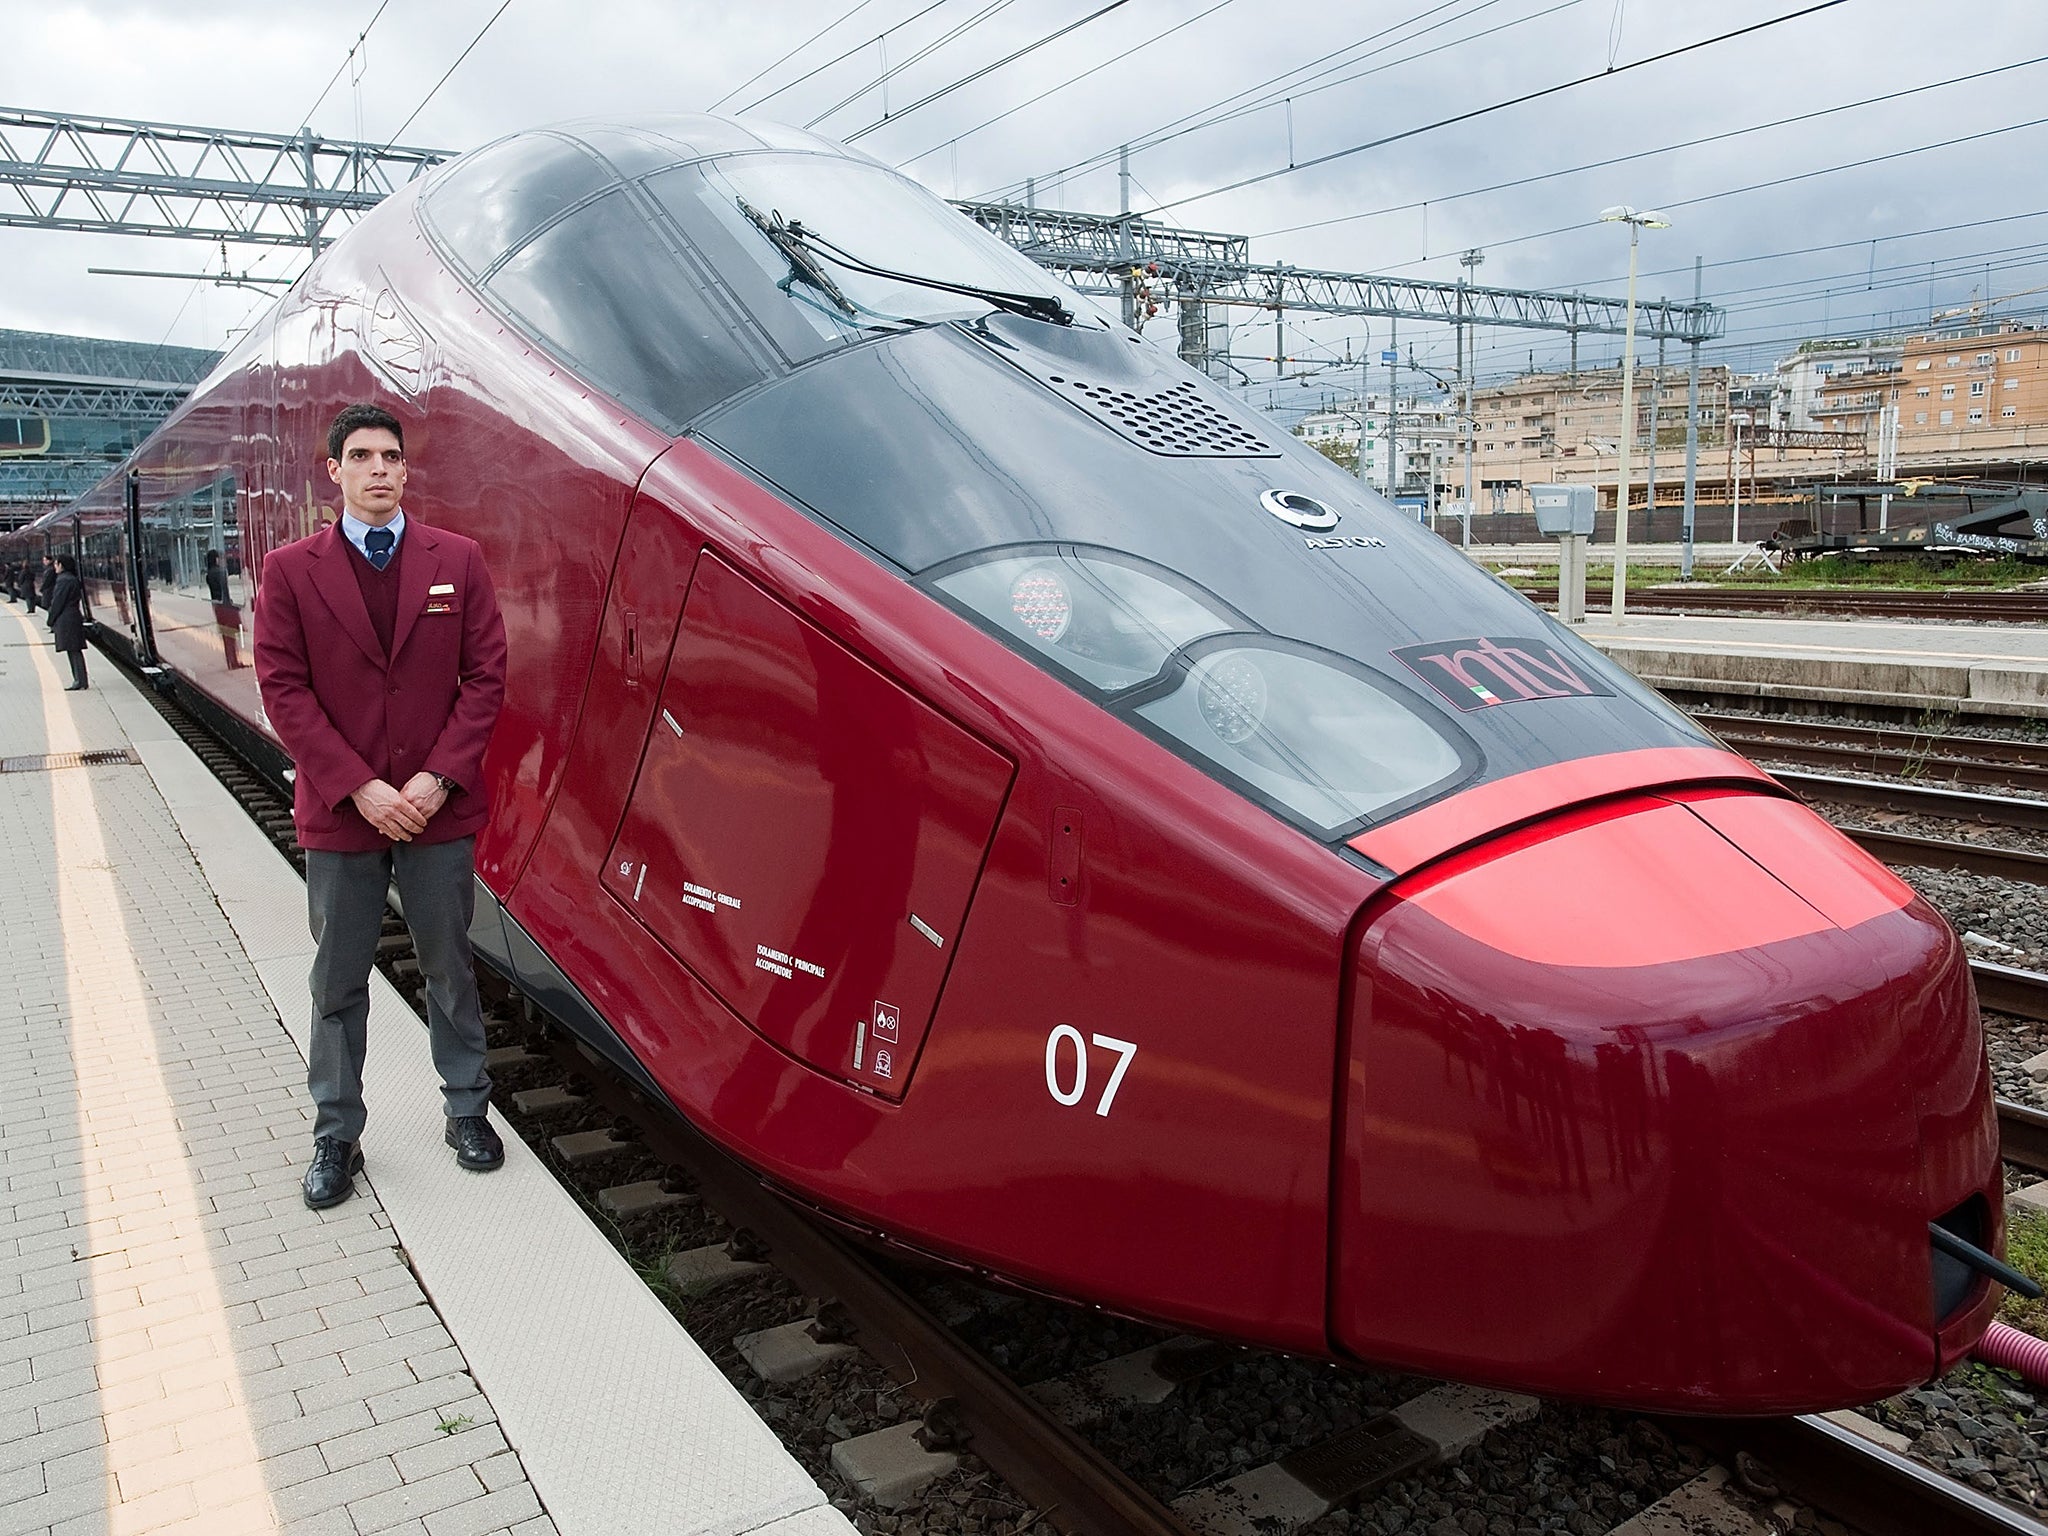 The NTV ran its first high-speed service between Rome and Naples in October 2012